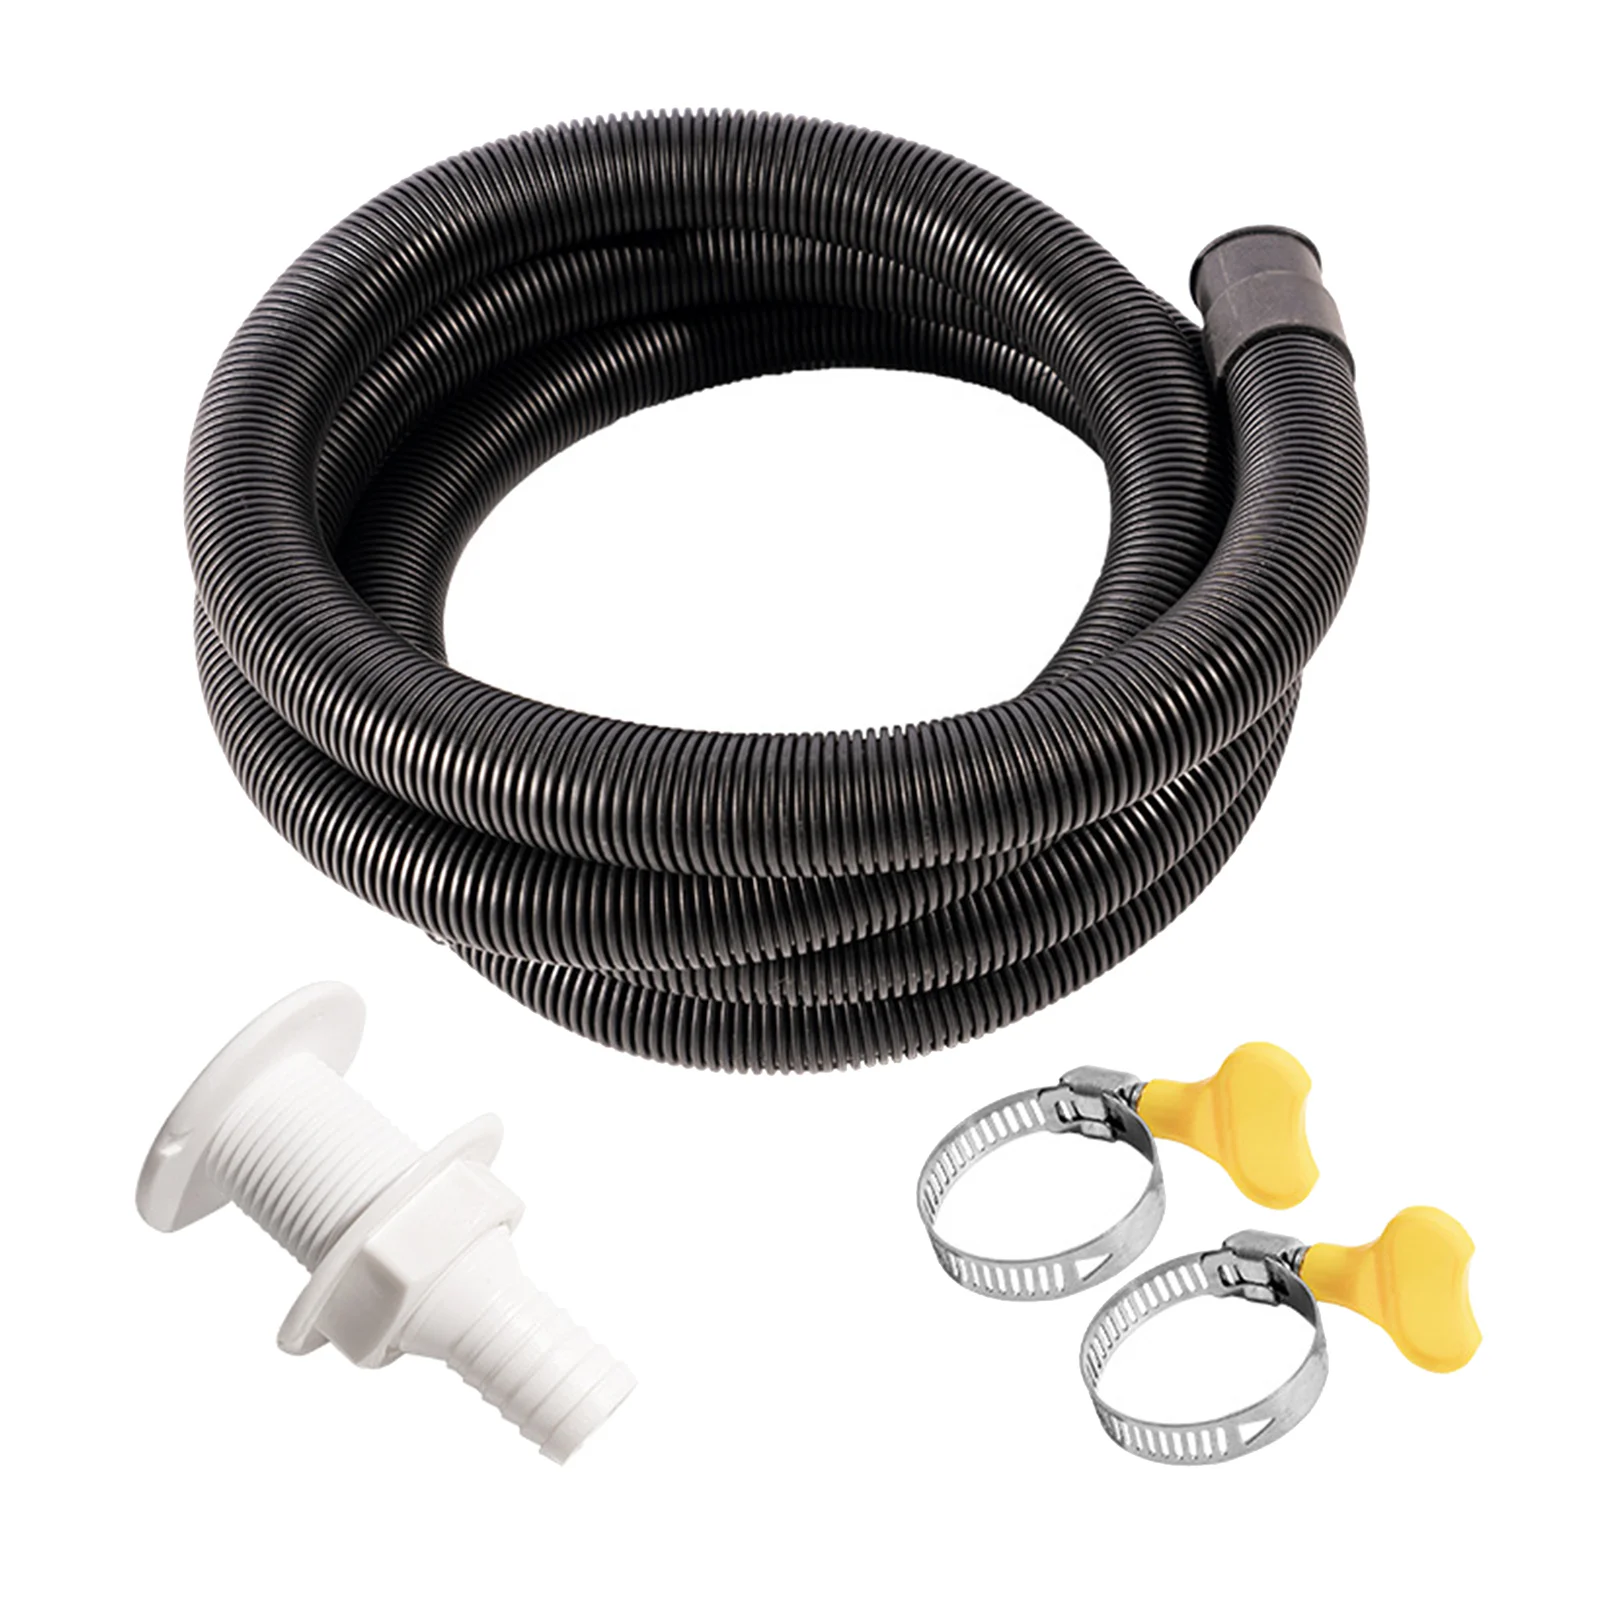 Boats Bilge Pump Hose Flexible 6.6 FT with Clamps and Thru-Hull Fitting